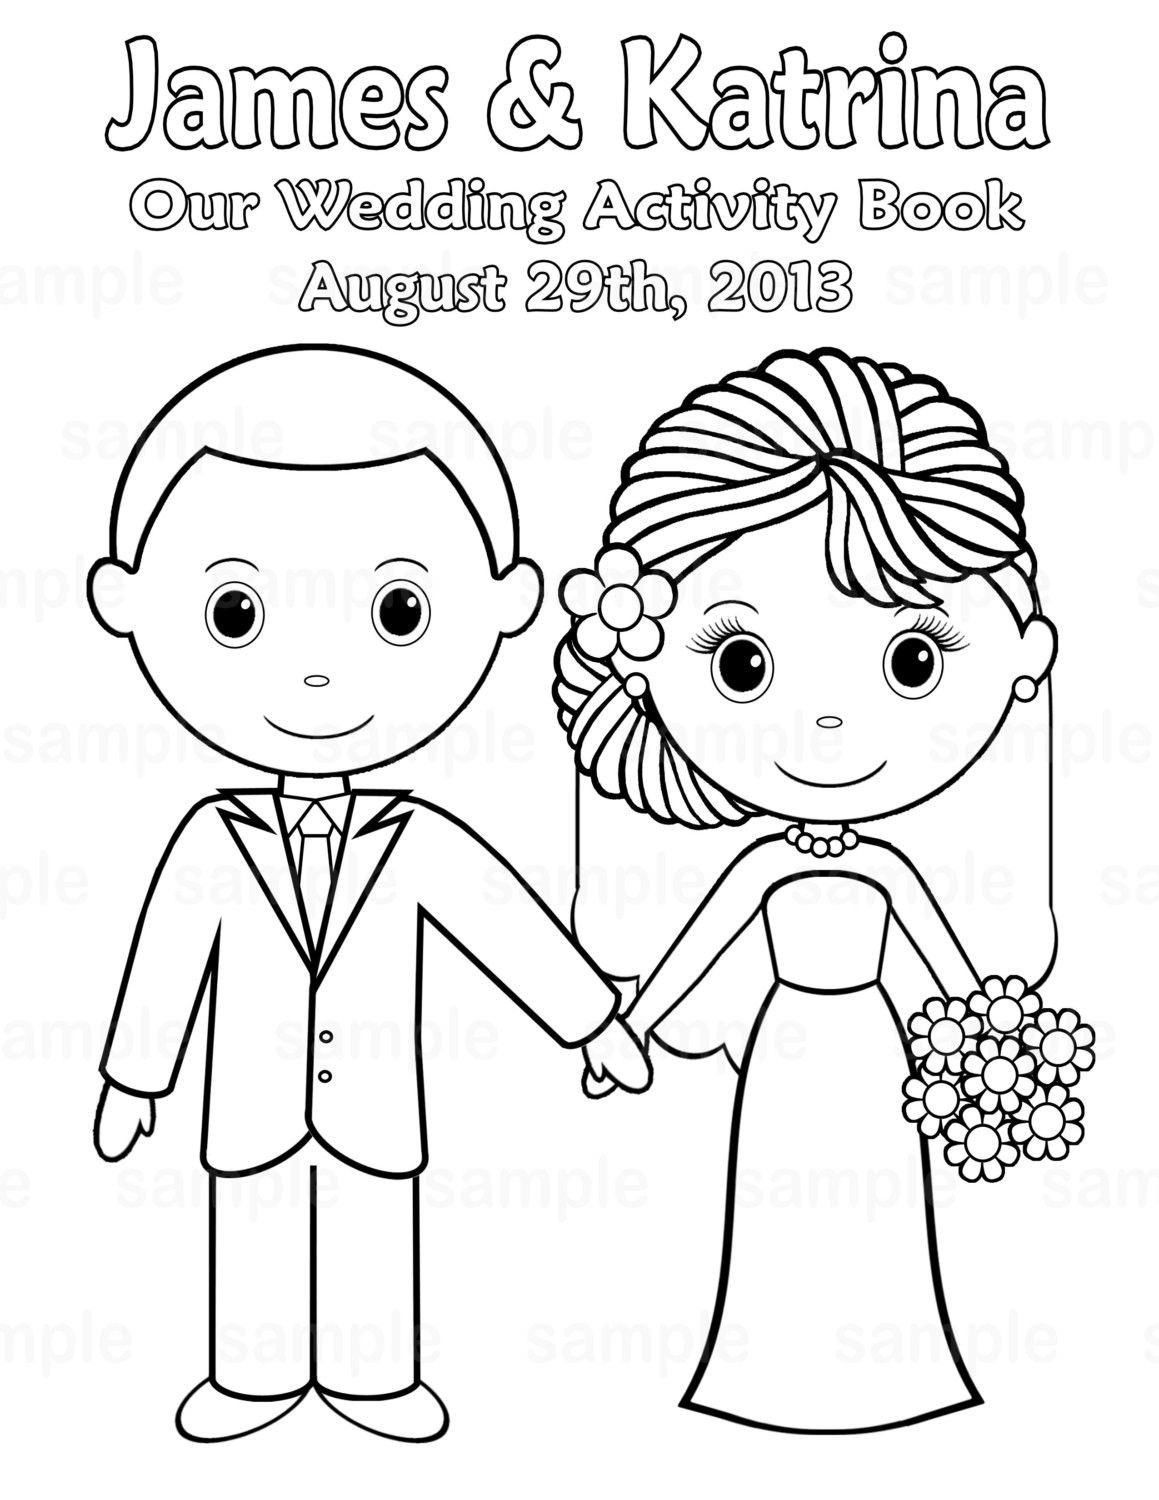 Printable Wedding Coloring Pages
 Free Printable Wedding Coloring Pages